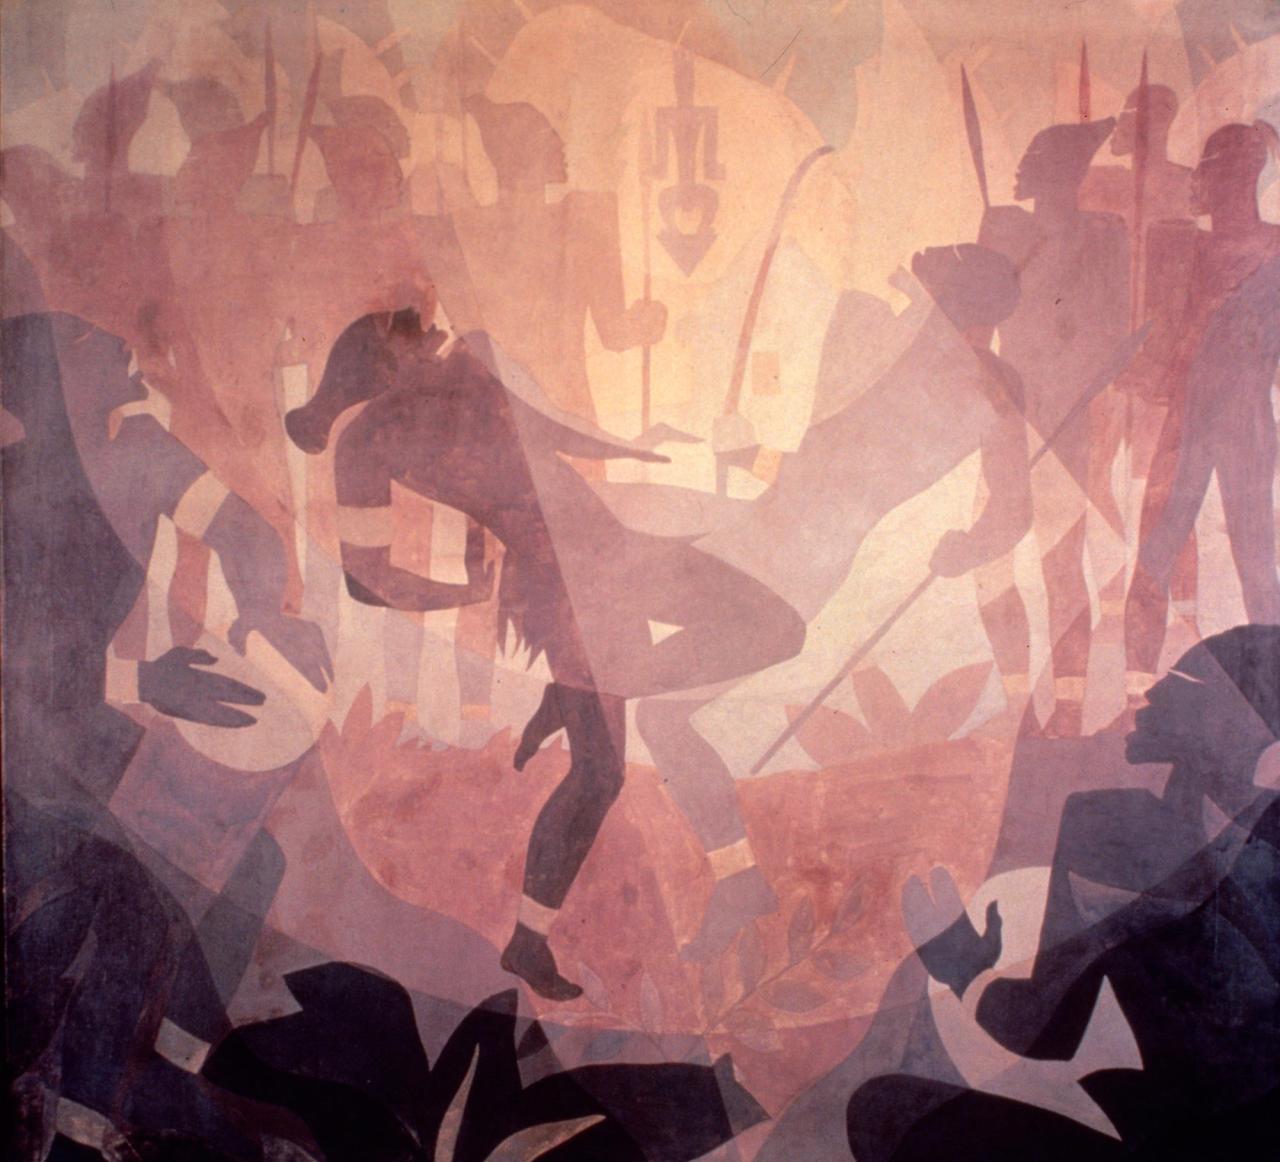 Song of the towers by aaron douglas